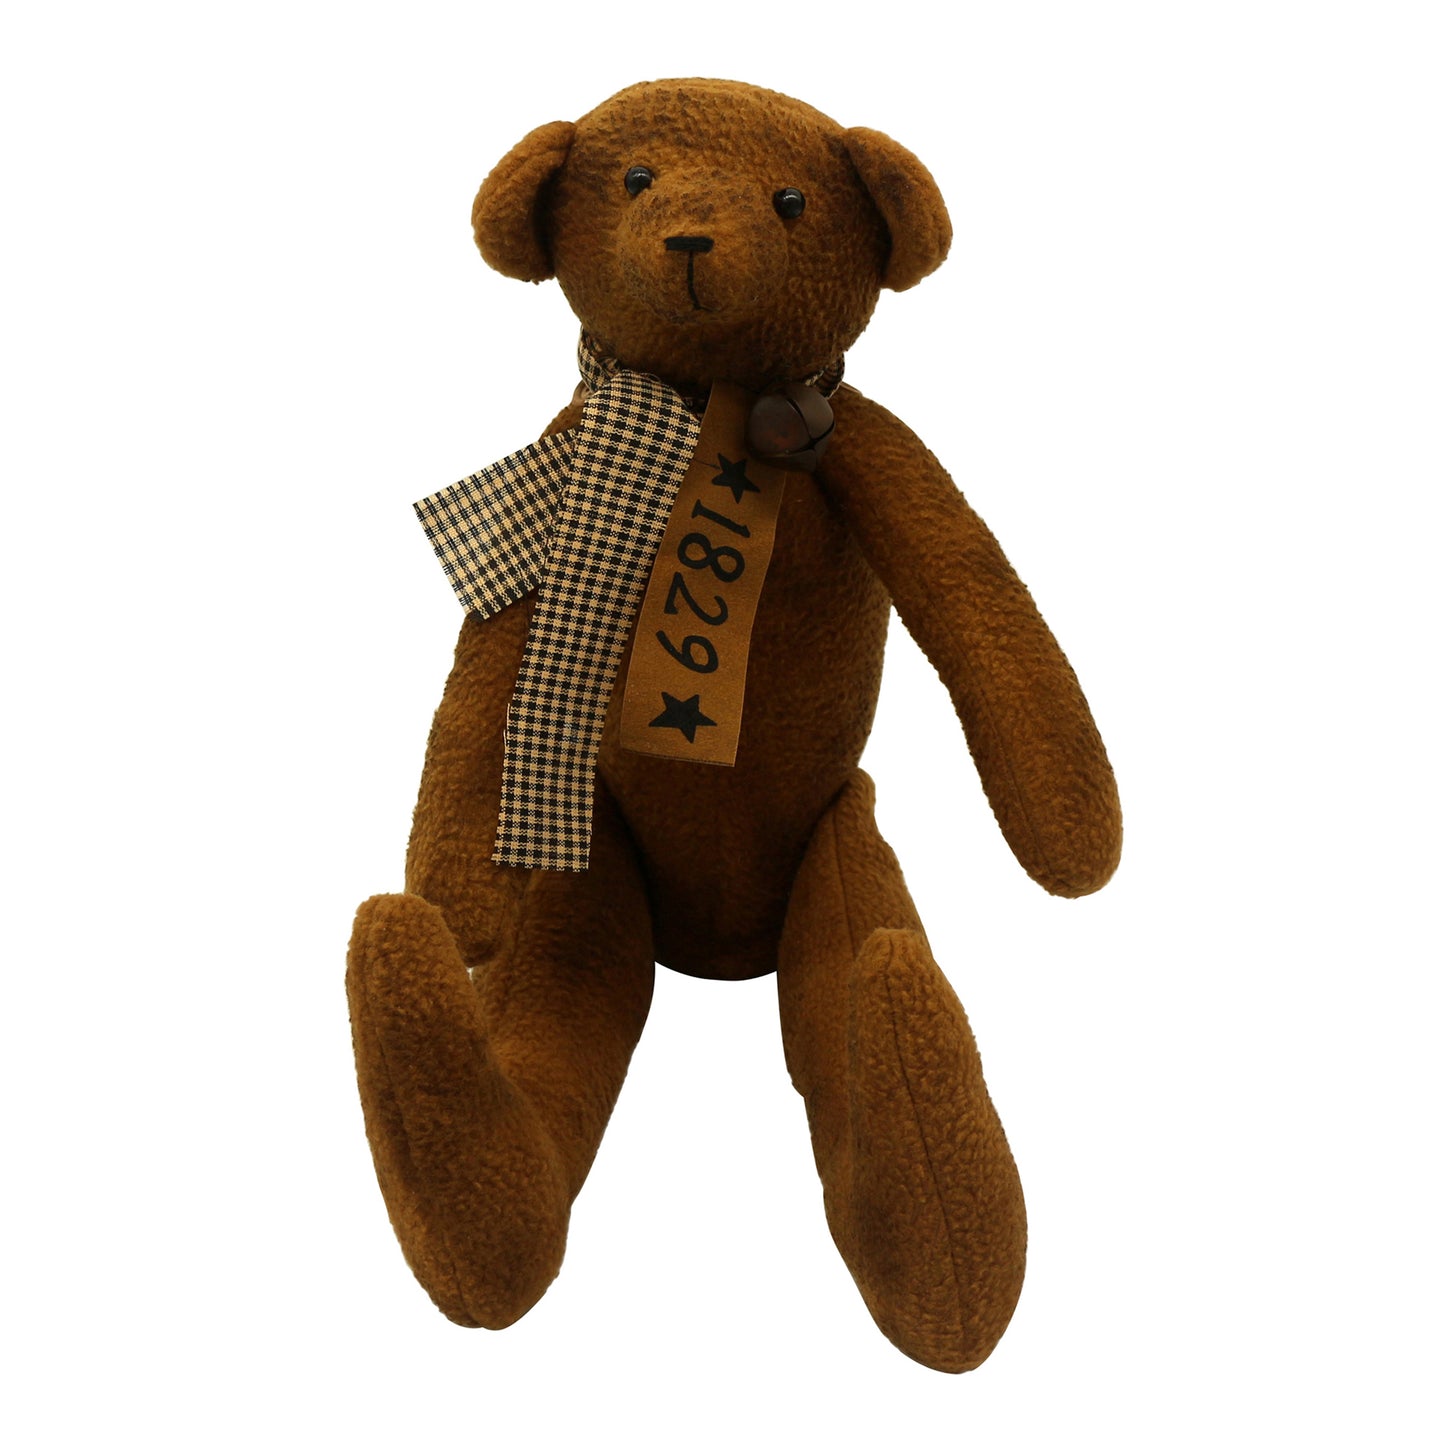 CVHOMEDECO. Vintage Grungy Stuffed Bear Ornament with Rusty Bell Collar. 17 X 11 Inch